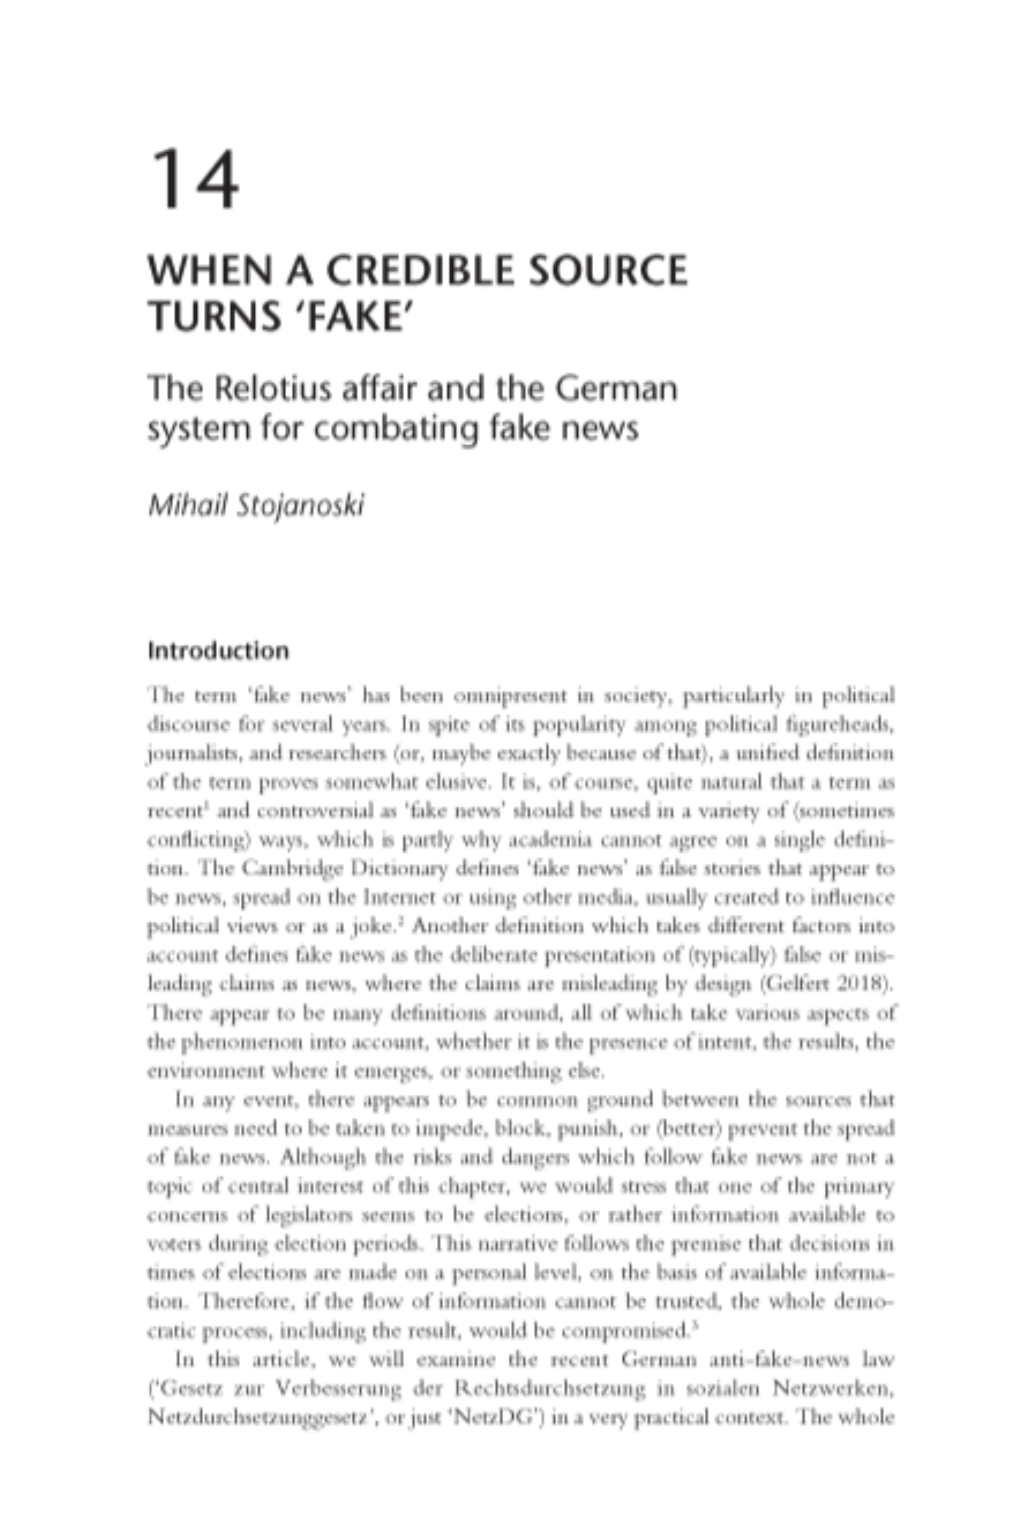 When a Credible Source Turns 'Fake': the Relotius Affair and the German System for Combating Fake News